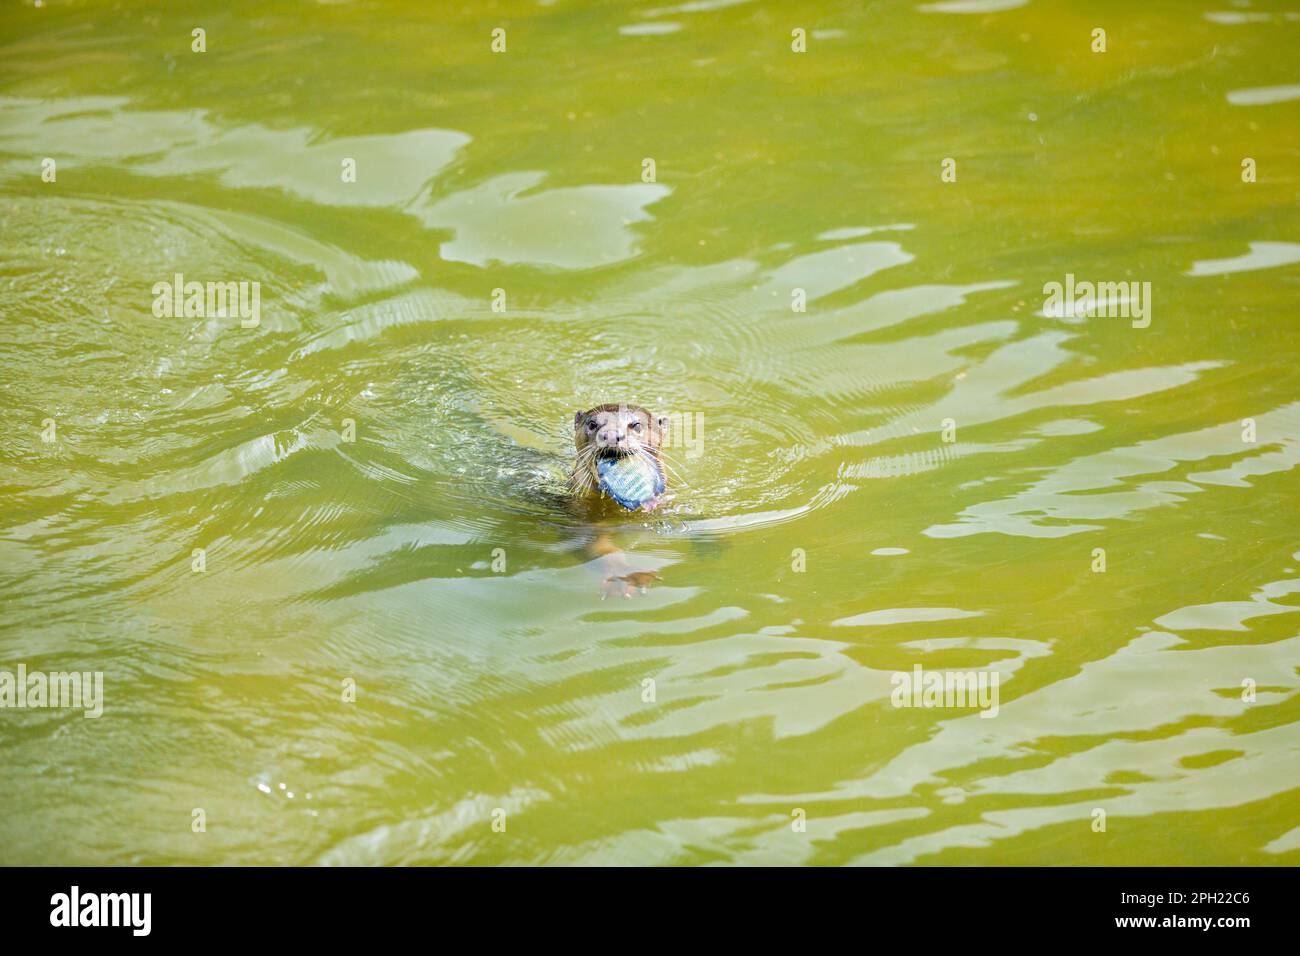 Juvenile smooth coated otter holding a freshly caught tilapia fish in its mouth as it swims to the edge of the urban river to eat, Singapore Stock Photo